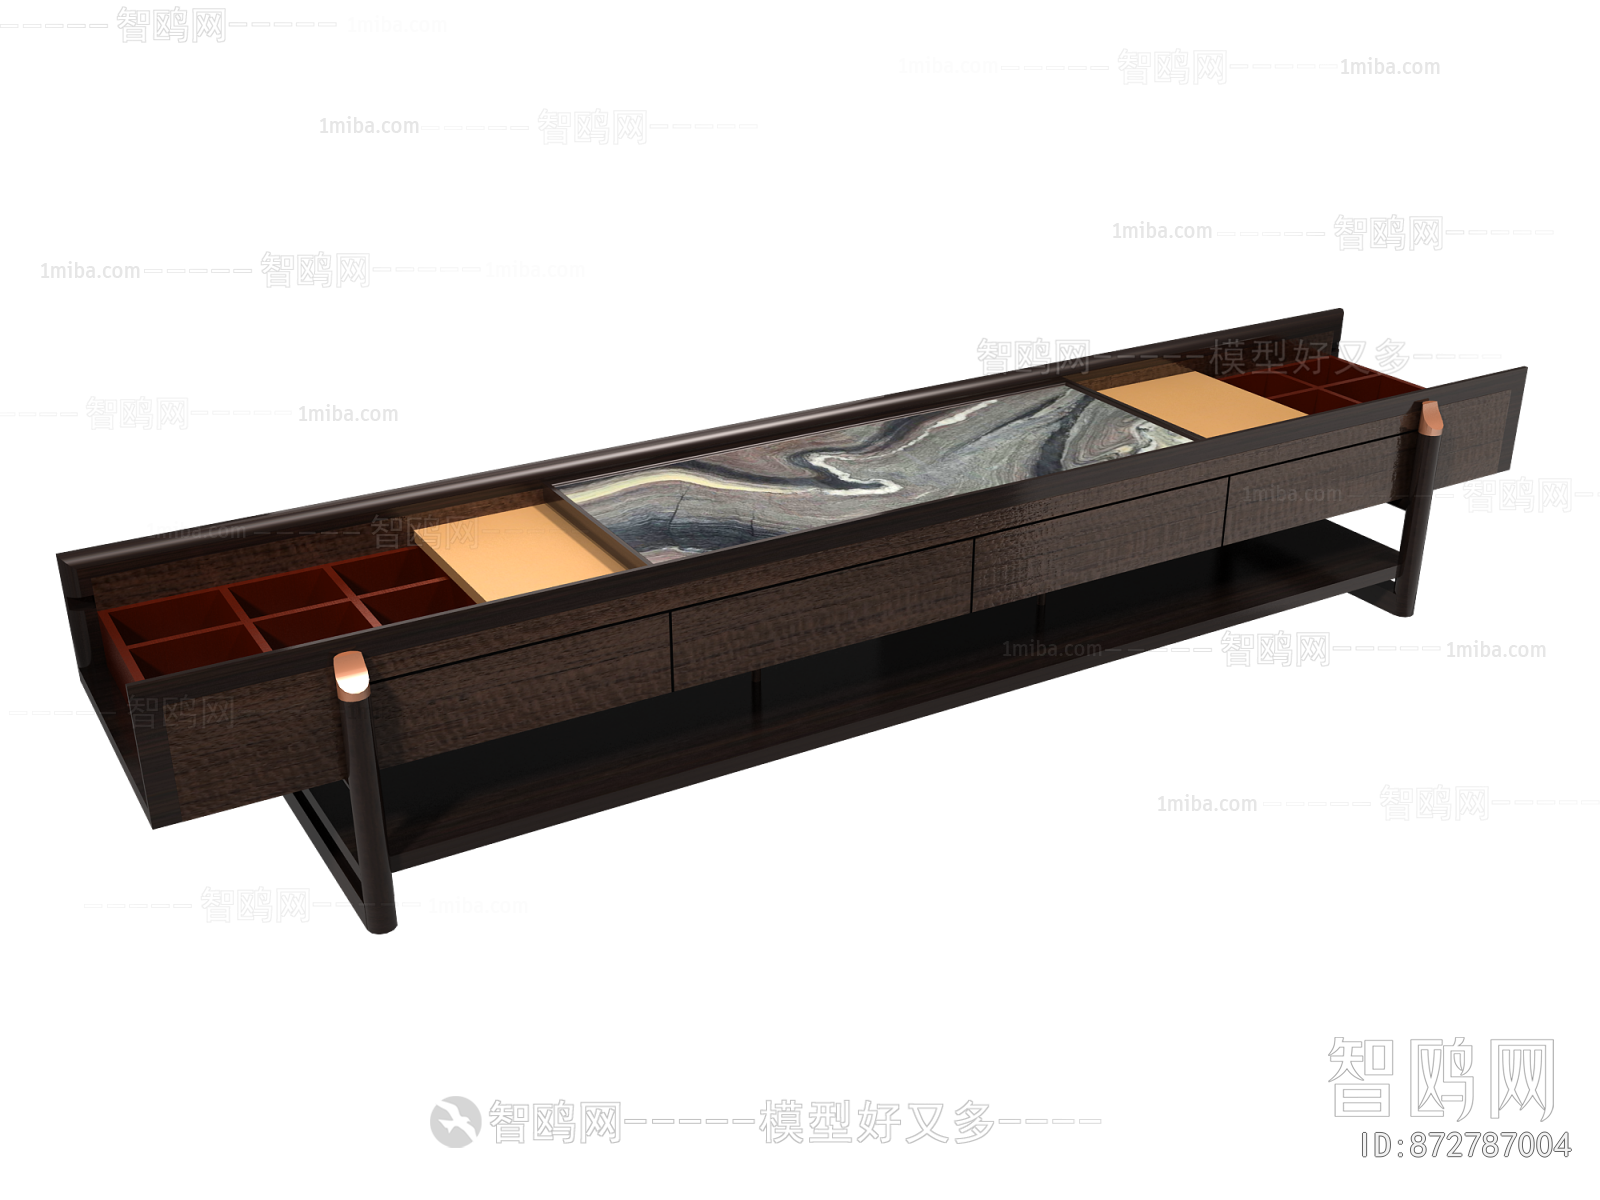 New Chinese Style TV Cabinet